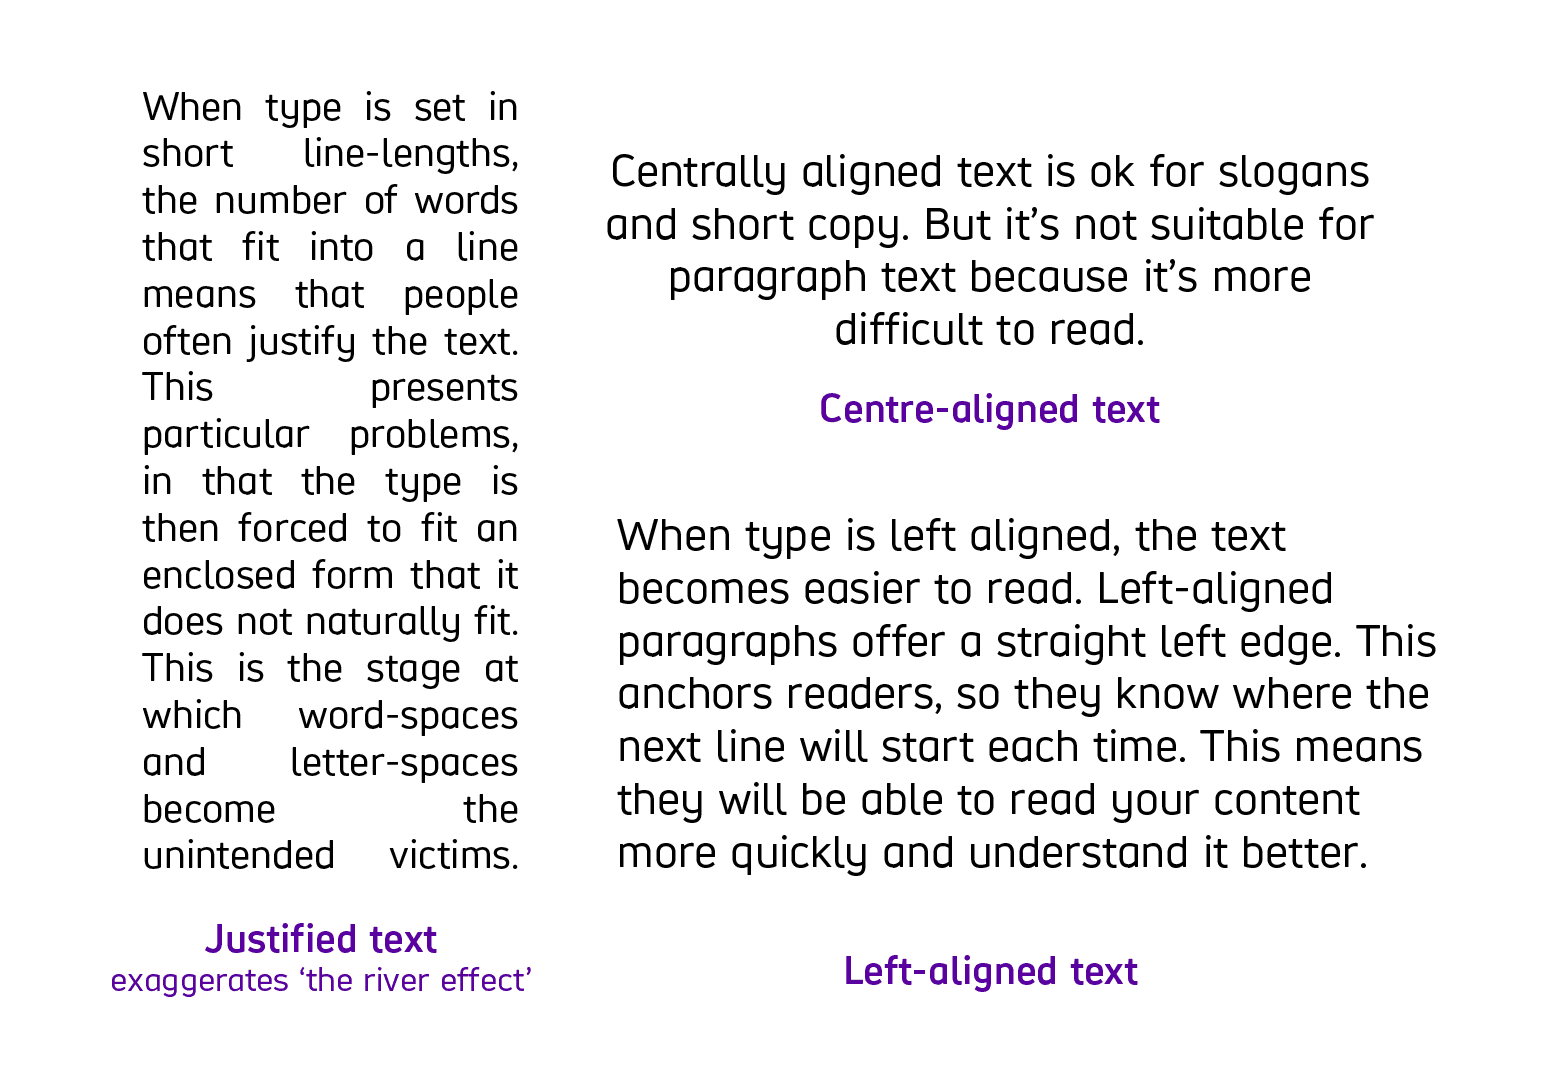 How different text alignment impacts readability. Justified text exaggerates the river effect, where white spaces appear between the words. Left aligned text is easier to read than centre aligned.